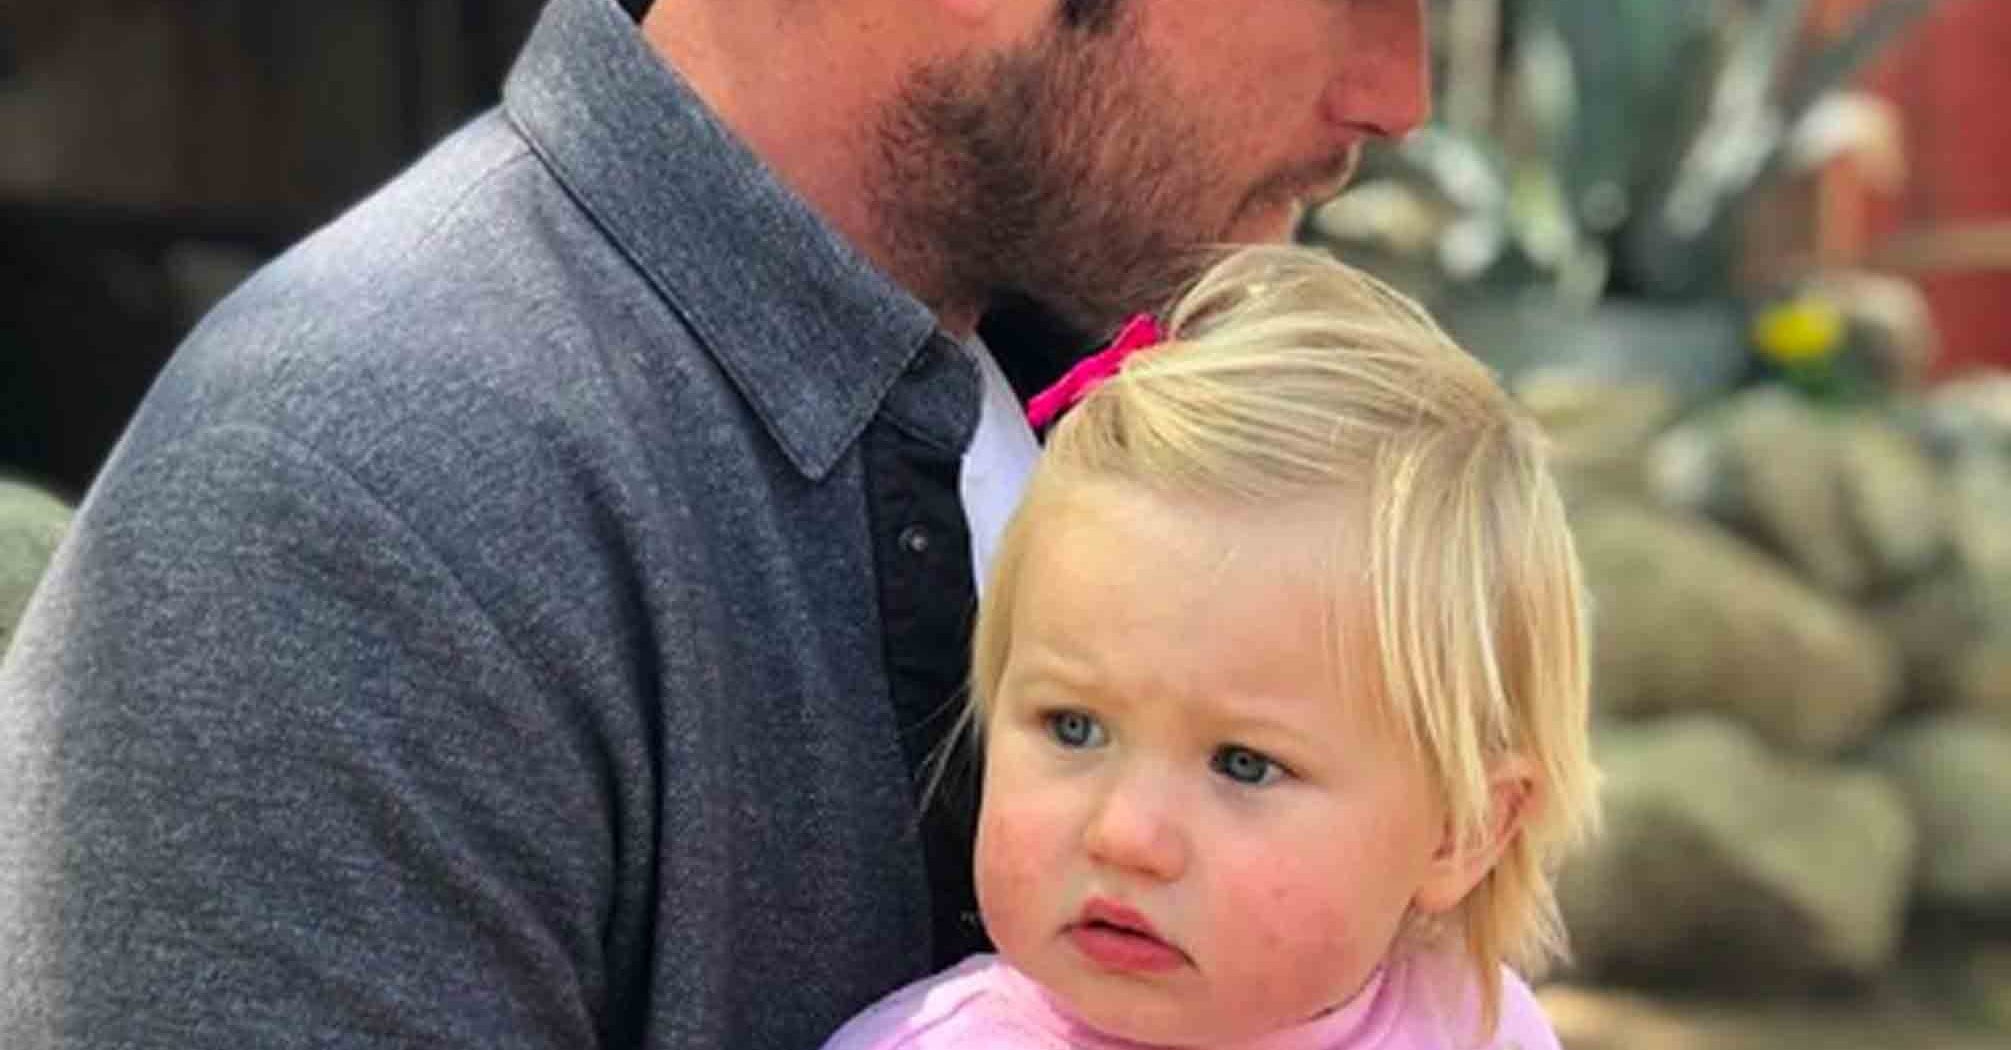 Bode and Morgan Miller speak out after daughter's drowning